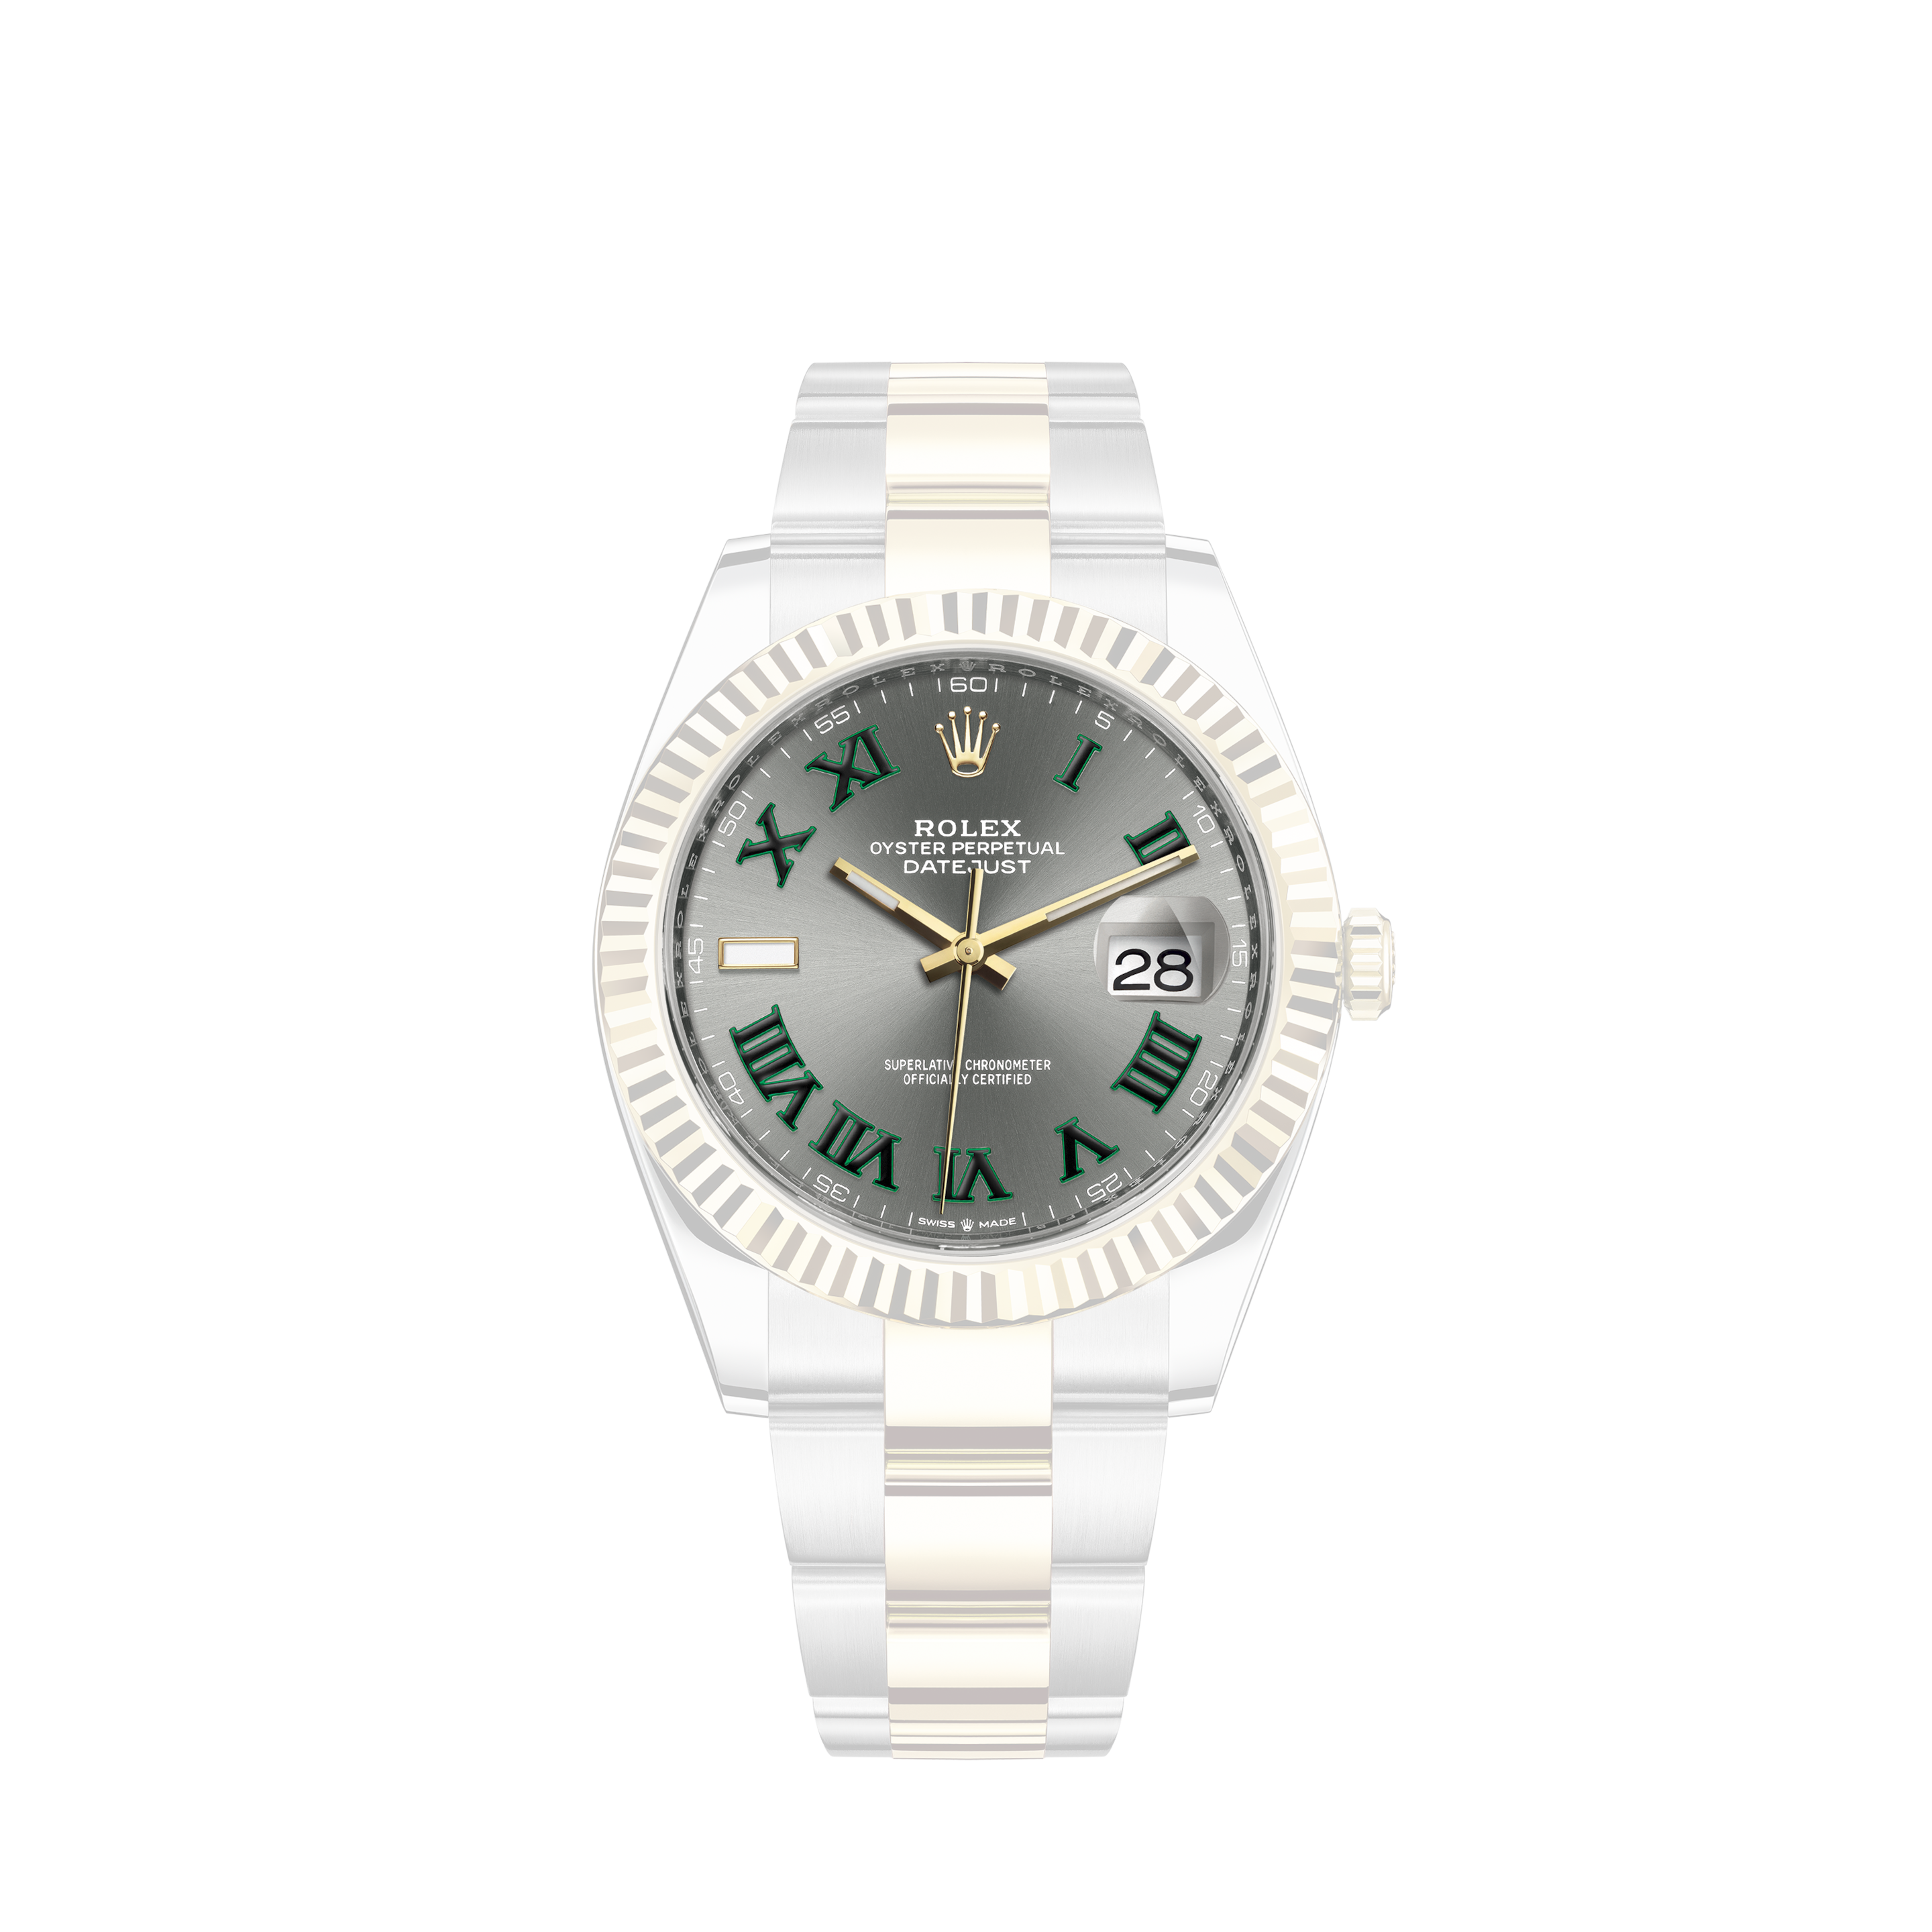 Rolex Women's Rolex Datejust Side Diamond bracelet 31mm Stainless Steel White Color Dial with Diamond Accent RRTRolex Women's Rolex Datejust Side Diamond bracelet 31mm Stainless Steel White Color Dial with Diamond Accent RT 68274